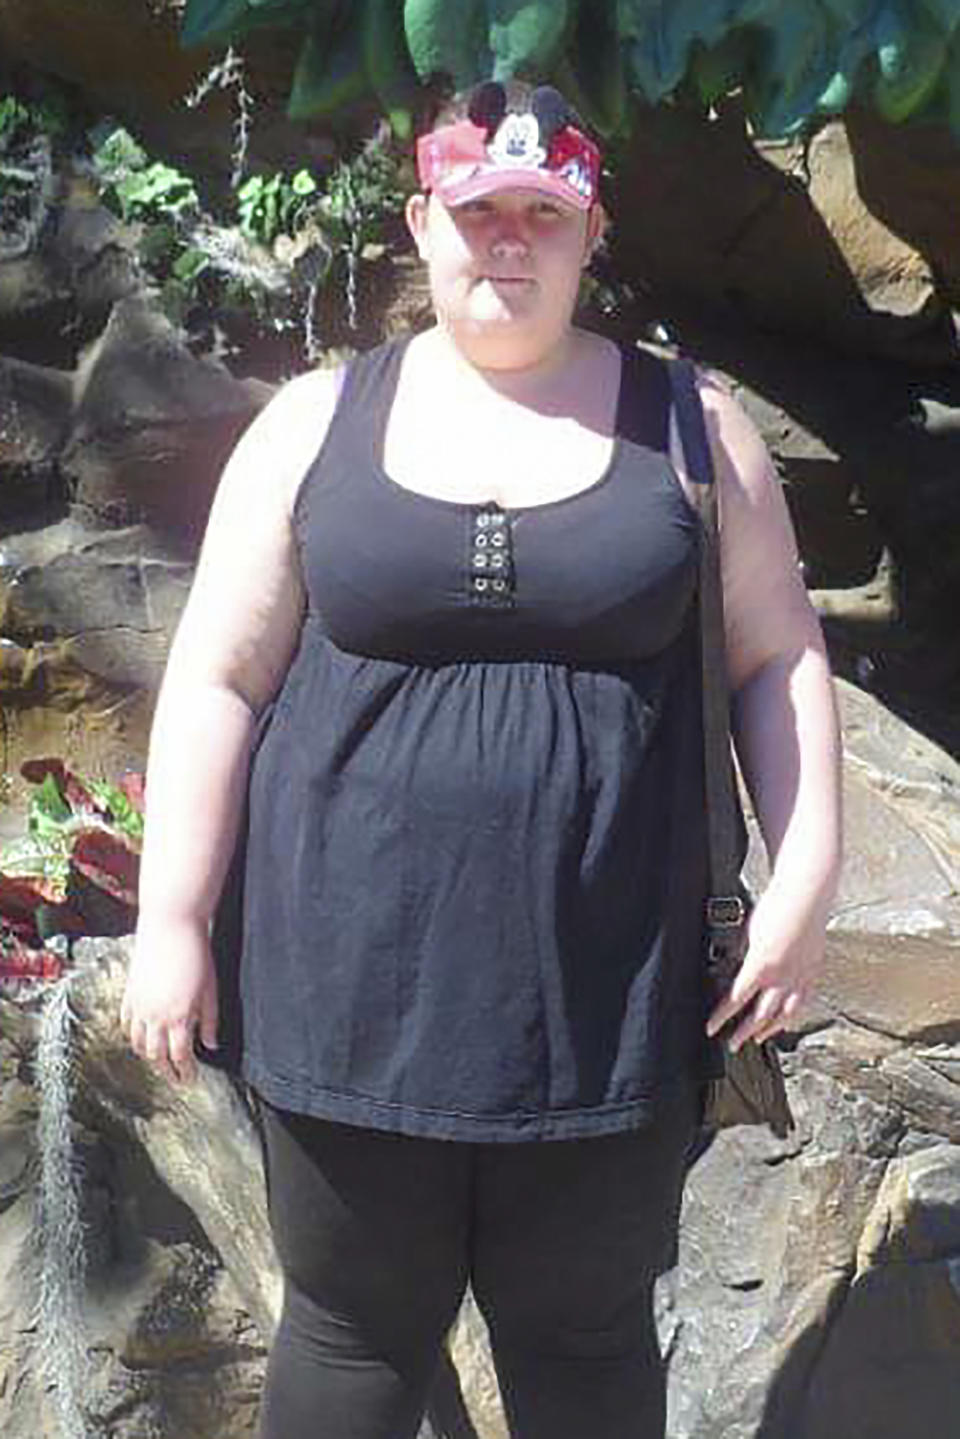 Sarah Wass pictured before her dramatic weight loss. [Photo: SWNS]